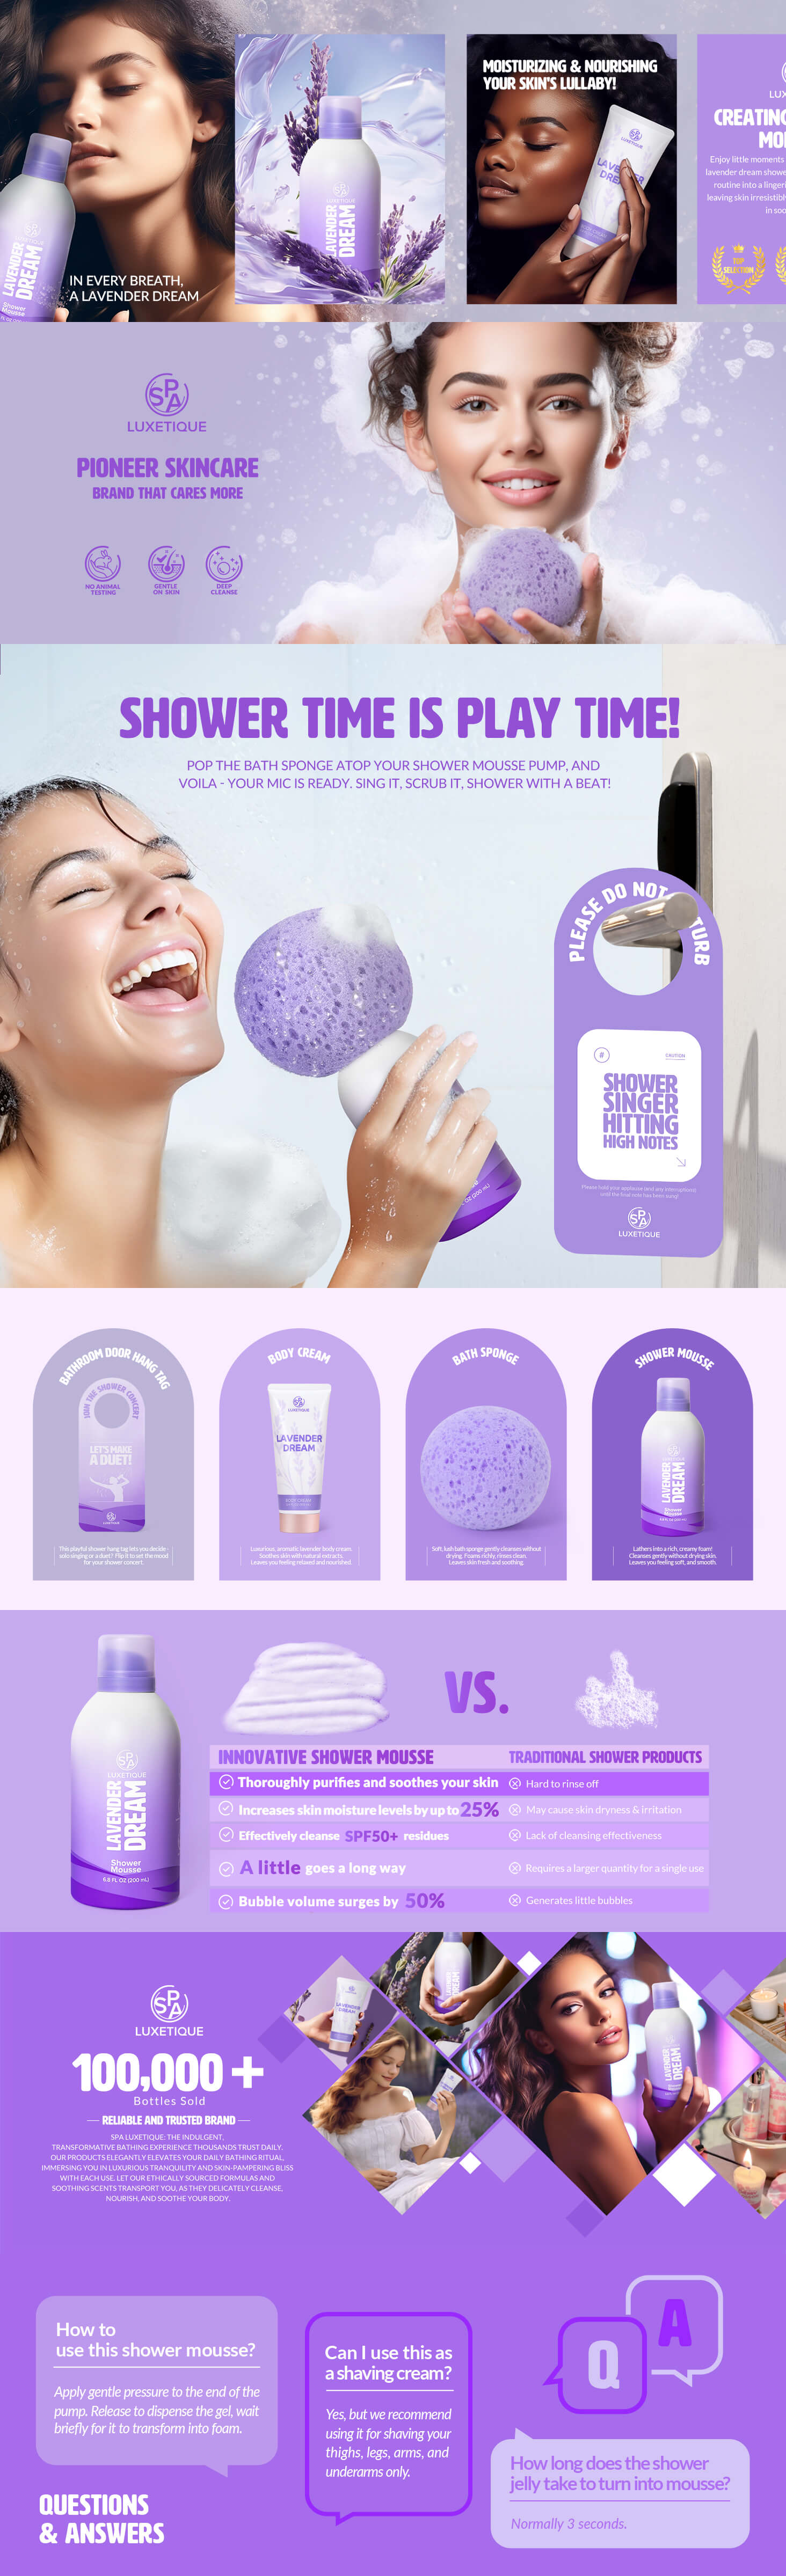 Start with a solo of our calming lavender shower mousse, followed by a smooth encore from the body lotion. The bathroom hangtag controls backstage access - 'Don't Disturb' for solo performances or 'Join the Concert' for harmonious duets. The showstopper? Our bath sponge that sits atop the mousse, mimicking a microphone.